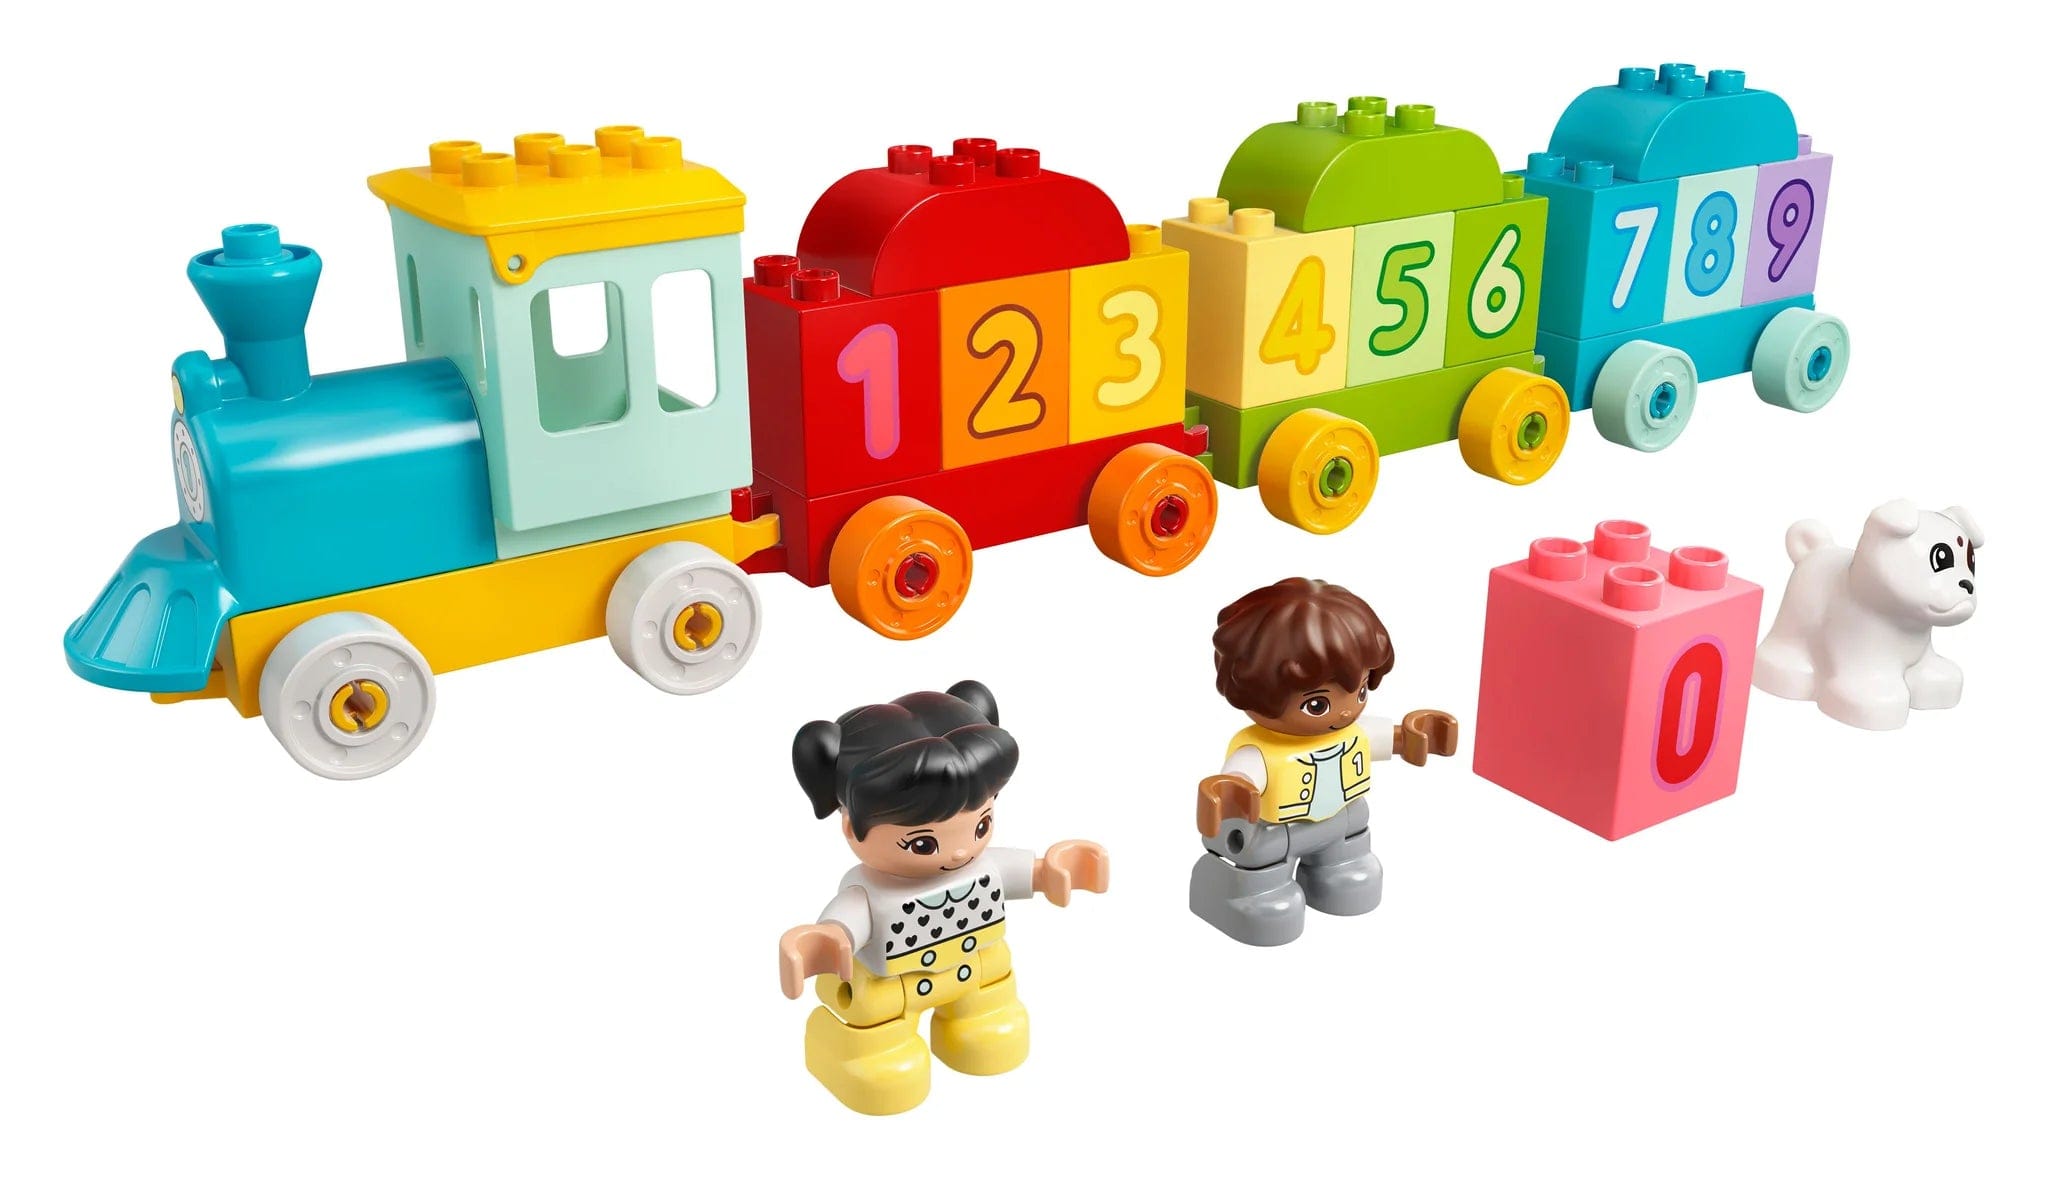 LEGO® Duplo Number Train - Learn To Count Lego no points Lil Tulips